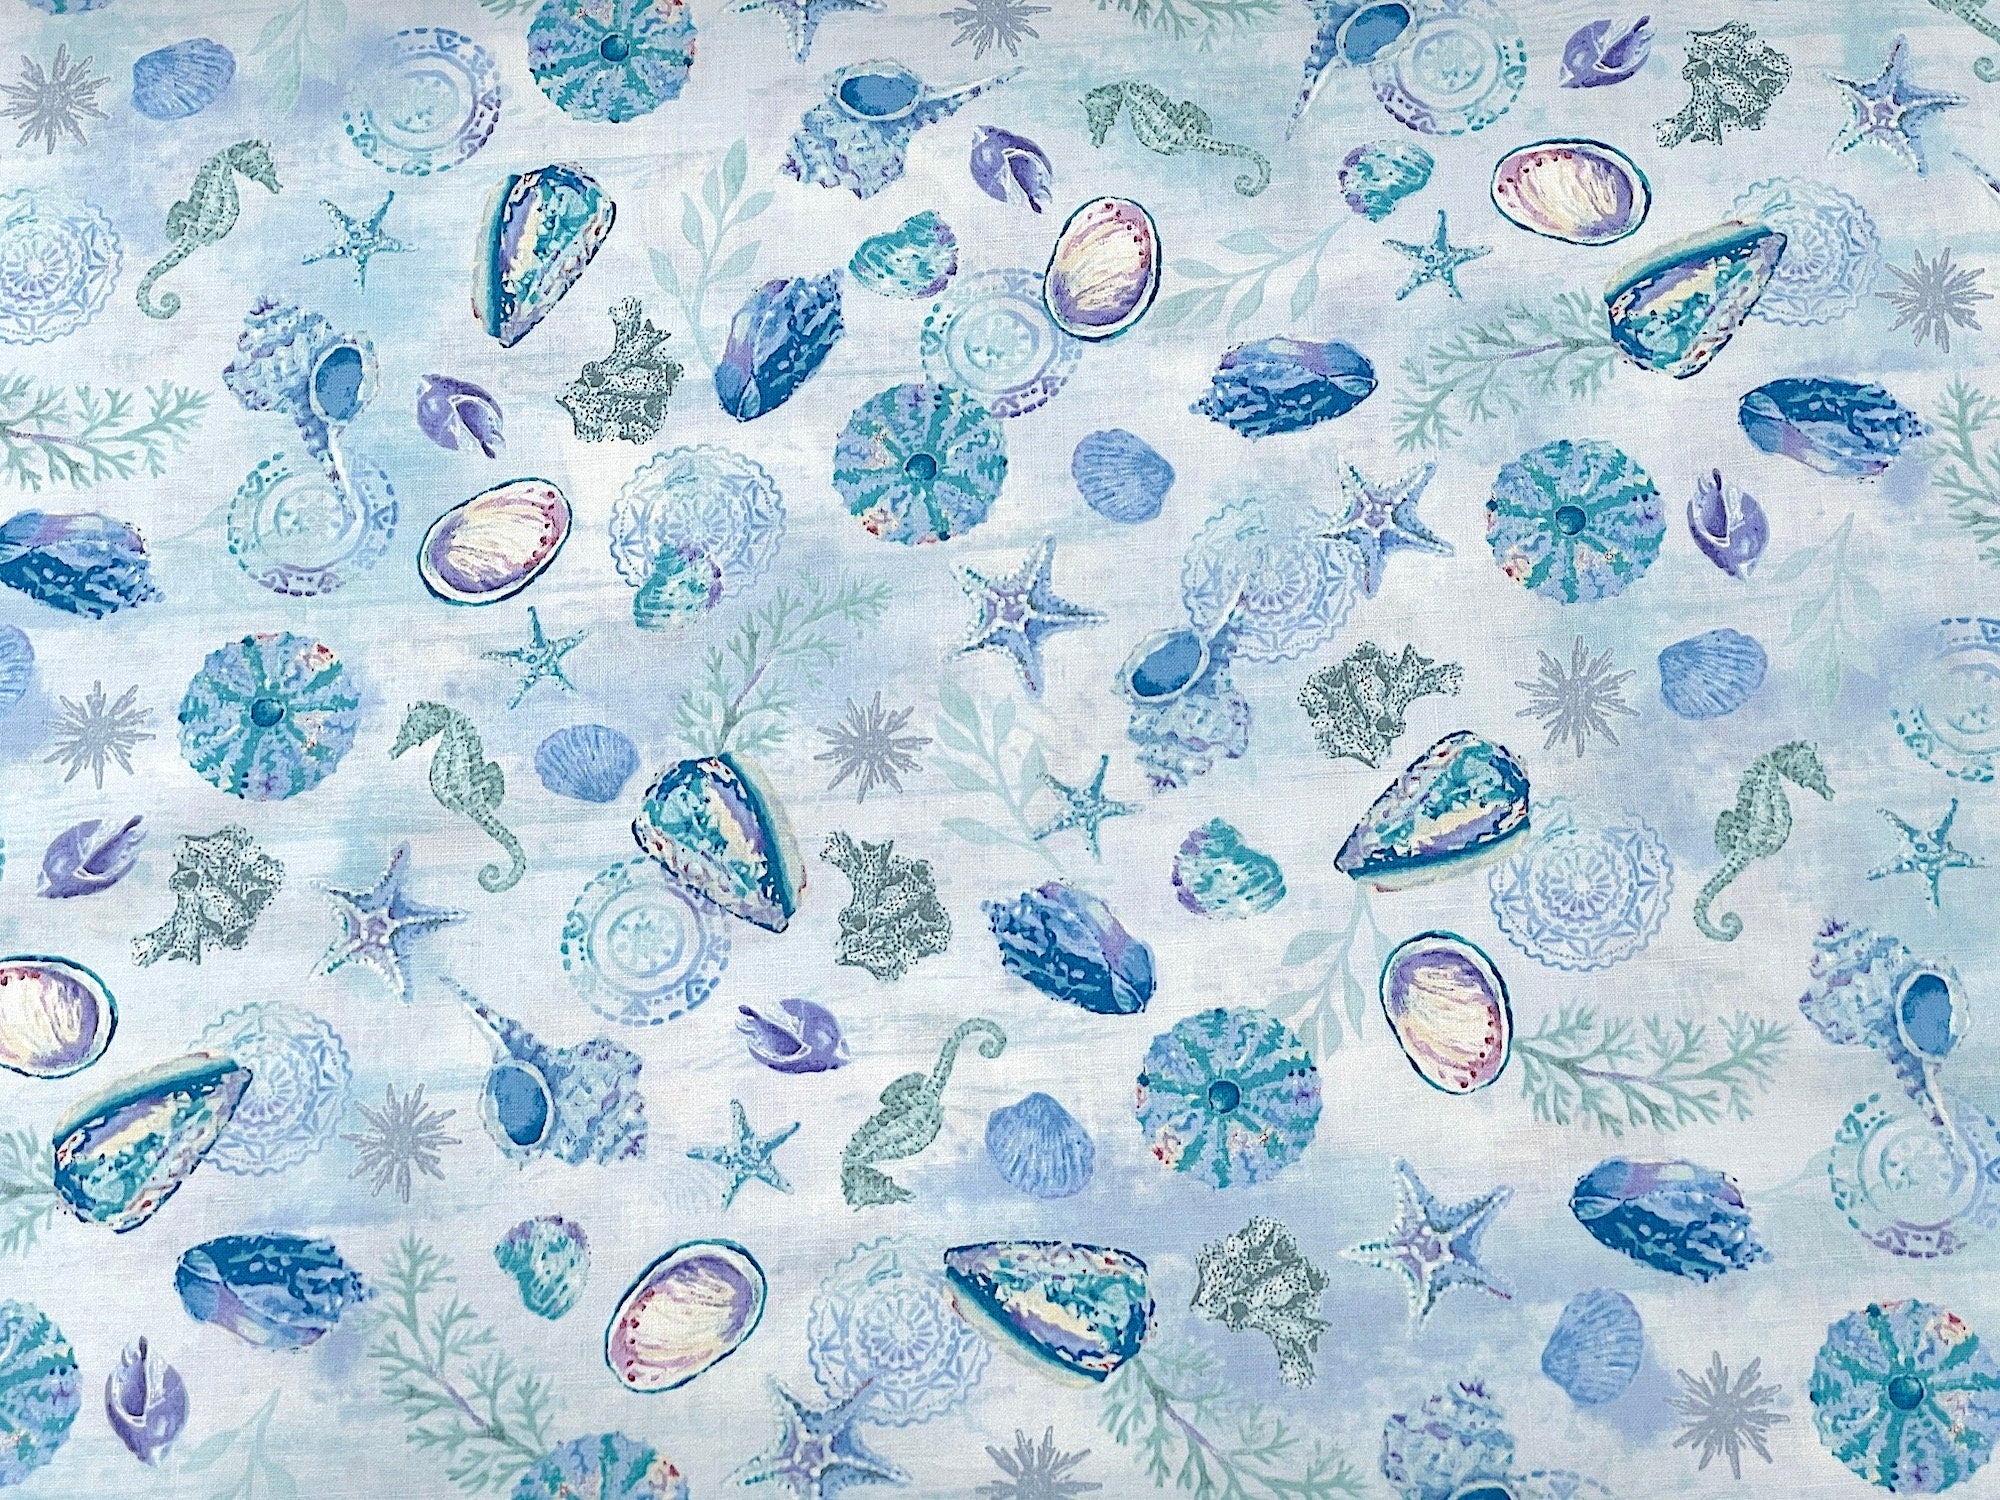 This light blue fabric is part of the Salt and Sea collection by Andrea Tachiera. This cotton fabric is covered with seashells, starfish and seahorses. See my other listings for more fabrics from this collection as seen in the last picture and video.